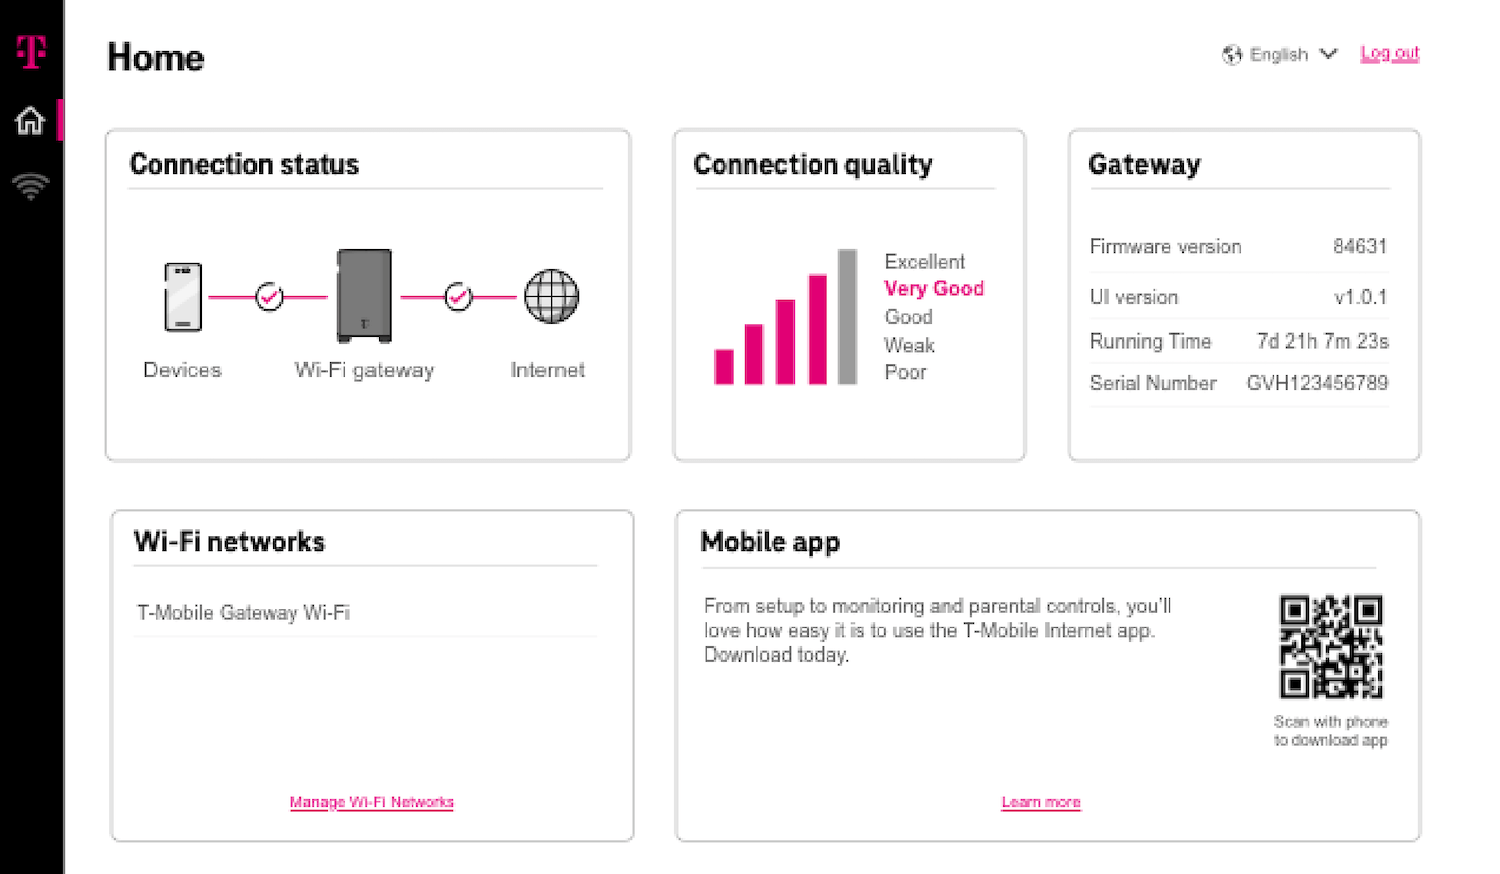 Another New T-mobile 5g Home Internet Gateway